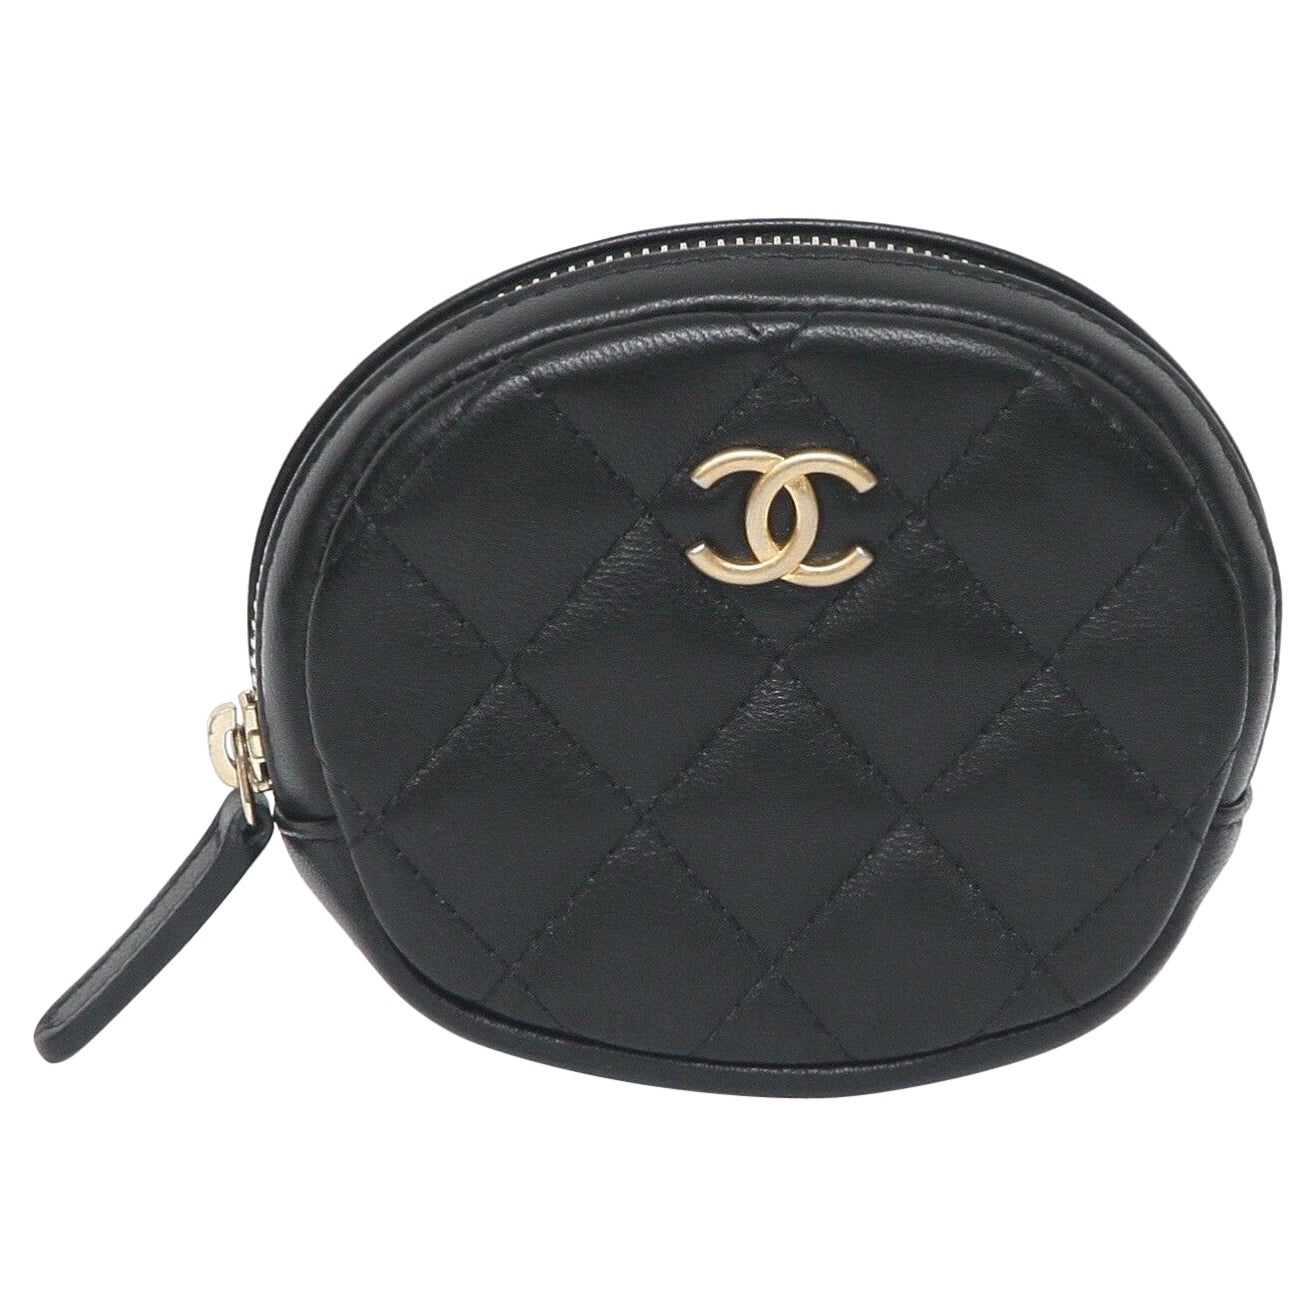 NIB 19A Chanel Reissue Waist Bag Fanny Pack Iridescent Sapphire Blue 64610  For Sale at 1stDibs